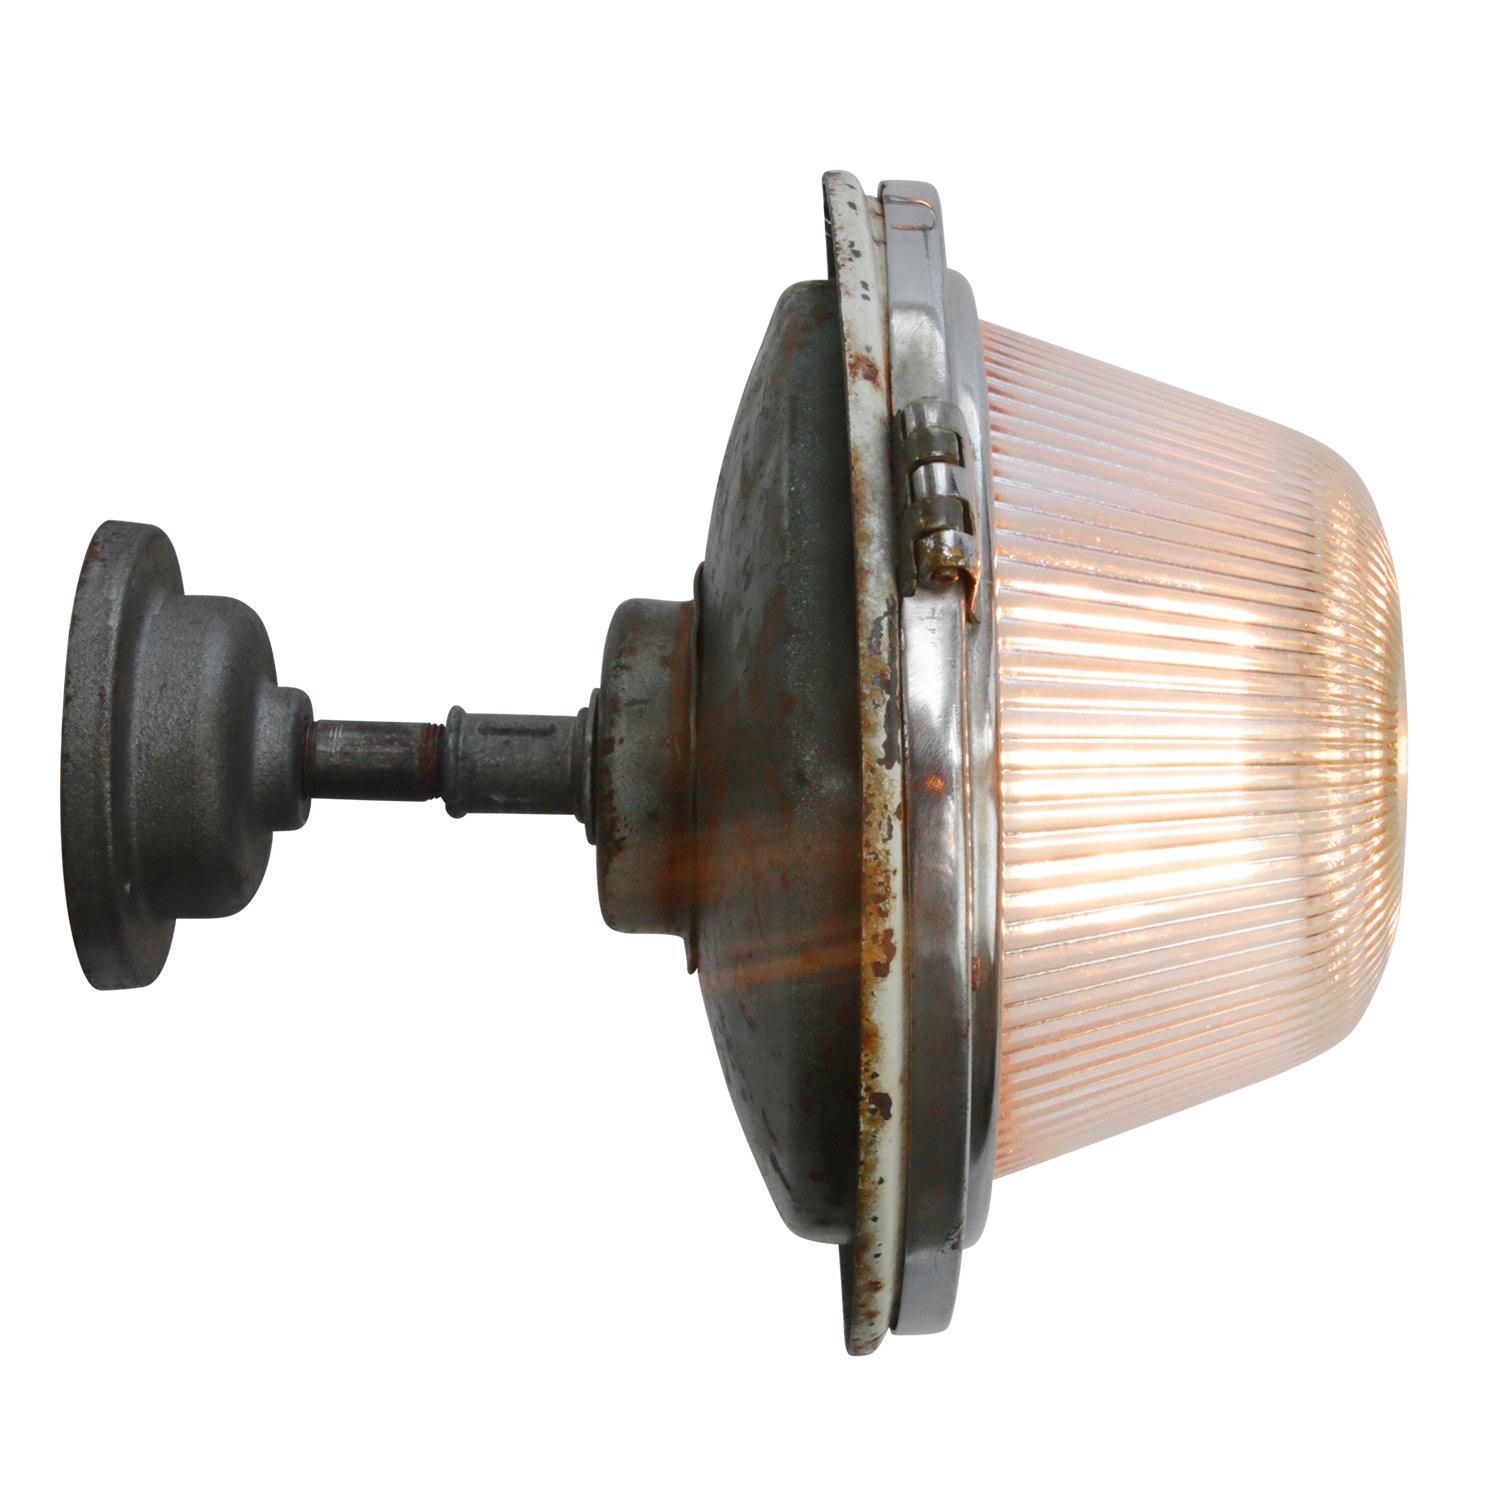 Holophane glass wall light
Clear striped glass shade
cast iron wall mount diameter 10 cm
wall lamp / ceiling scone

Weight: 2.70 kg / 6 lb

Priced per individual item. All lamps have been made suitable by international standards for